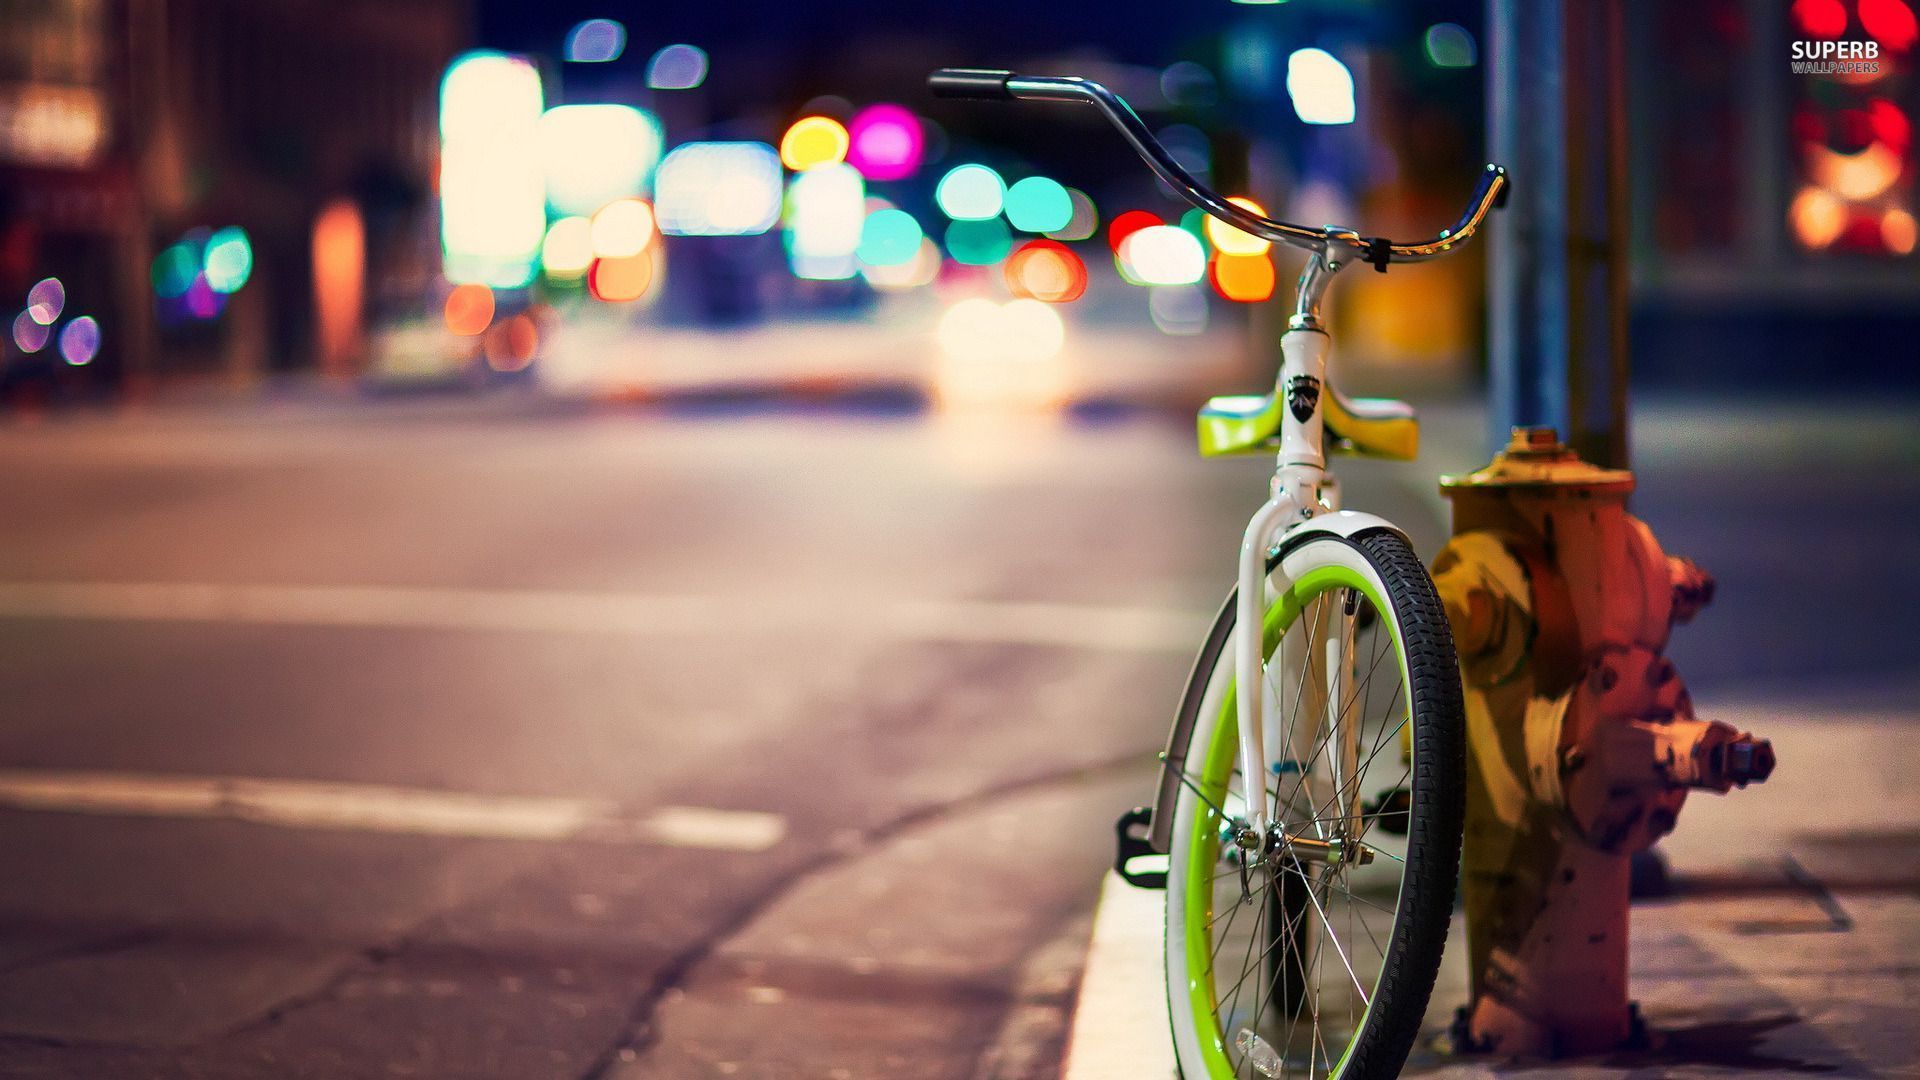 Bicycle on the city street wallpaper - Photography wallpapers - #23222